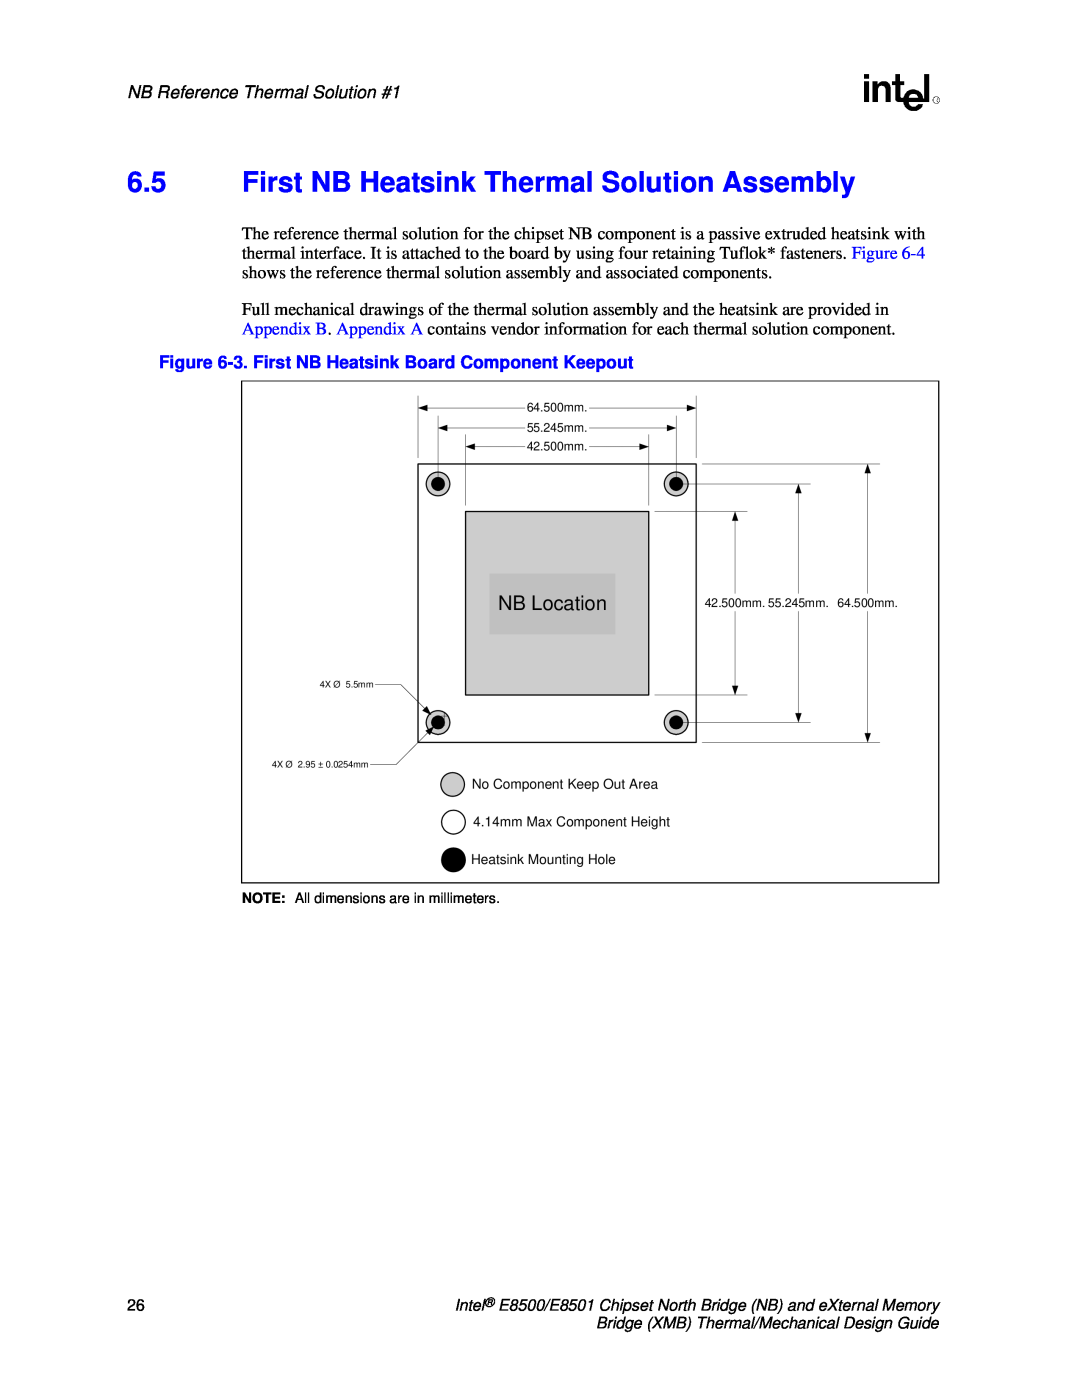 Intel E8501 manual 6.5First NB Heatsink Thermal Solution Assembly, TNBLocation, NB Reference Thermal Solution #1 